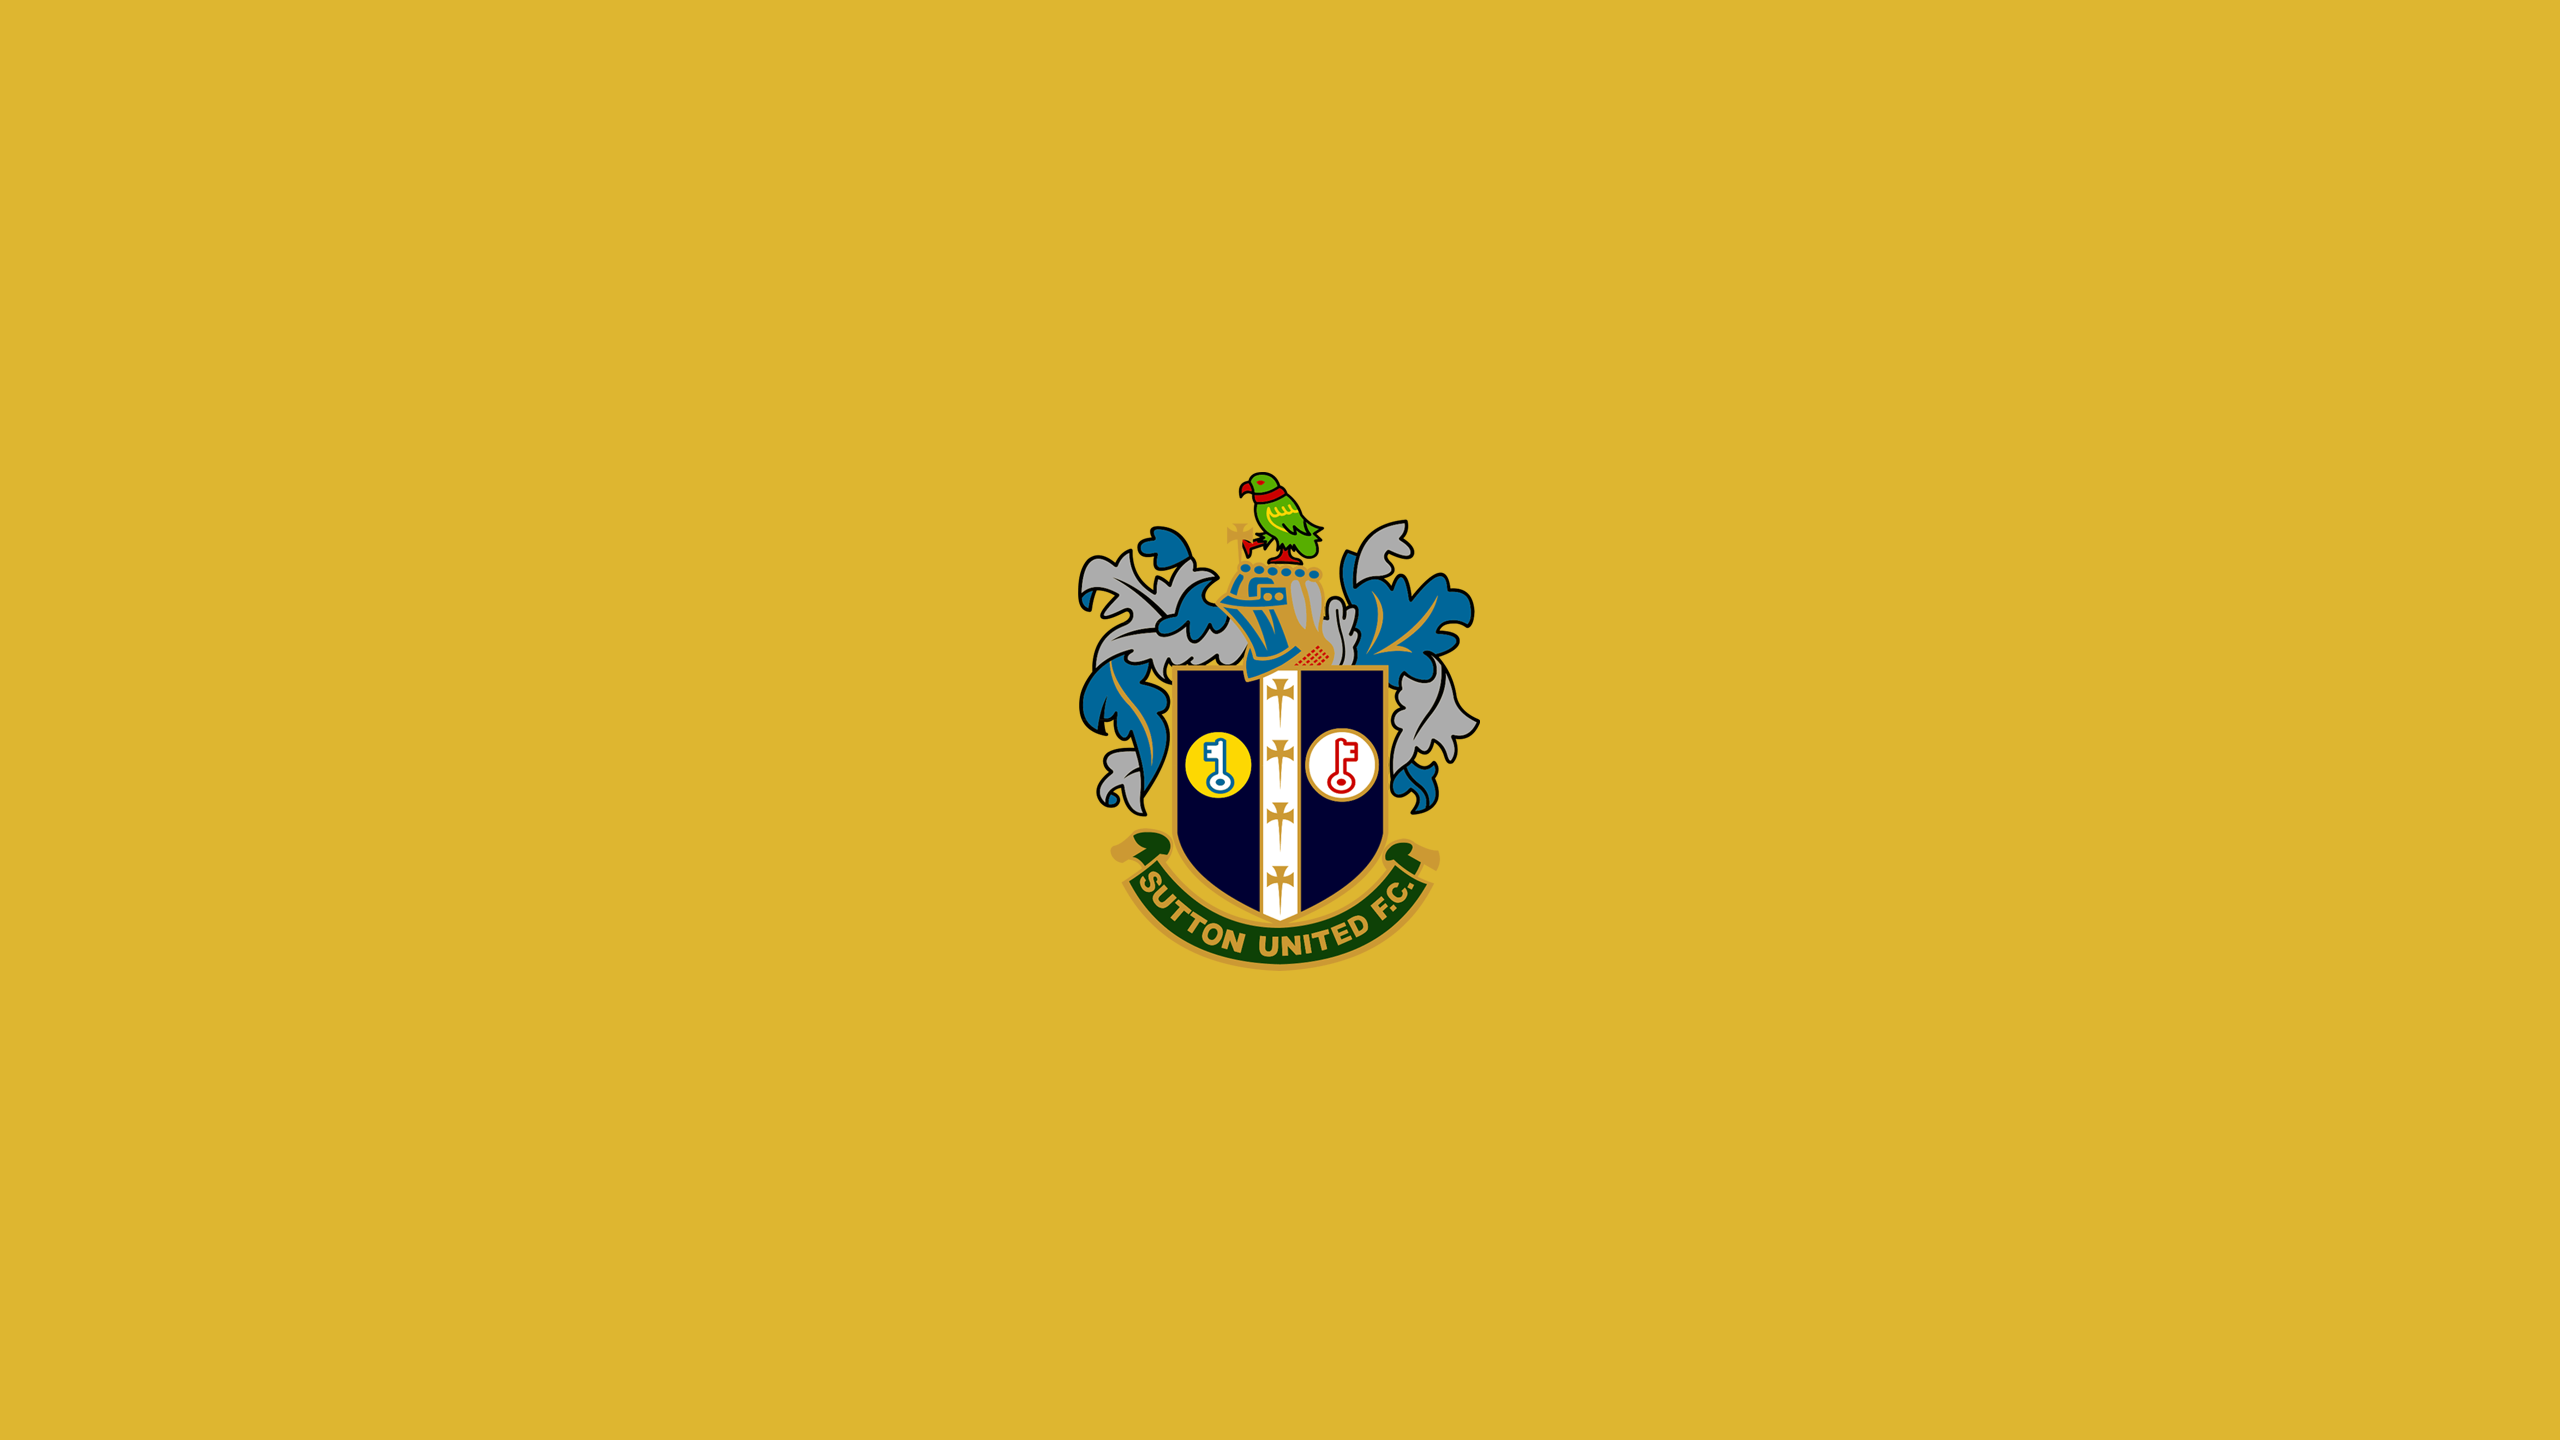 Sutton United F.C. Wallpapers